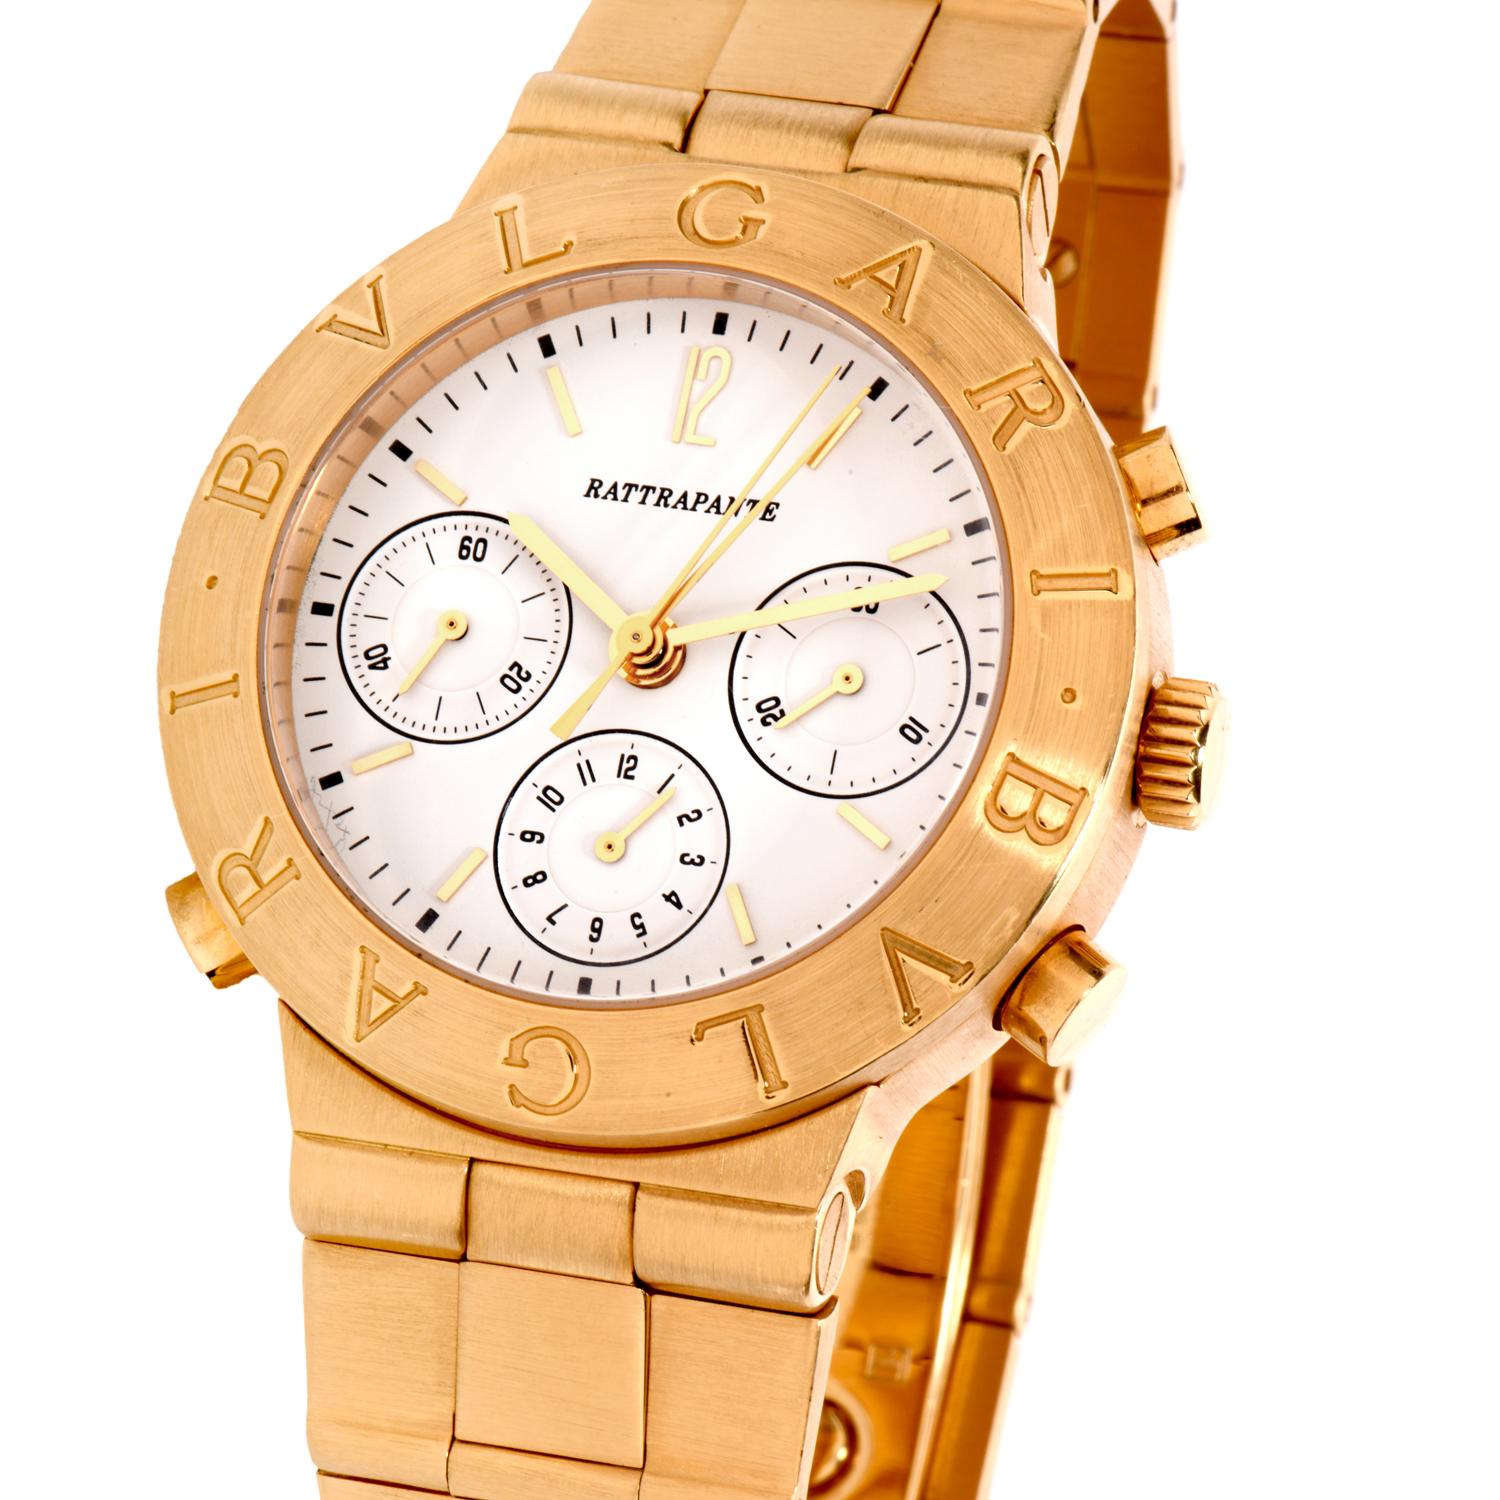 Show your colleagues who is in charge, with this prominent Bvlgari Diagono 18K Gold Rattrapante watch! 

This Jumbo Size Diagono Pro Terra Rattrapante watch is crafted in 18 karat yellow gold and is purity marked. The movement is automatic, and the